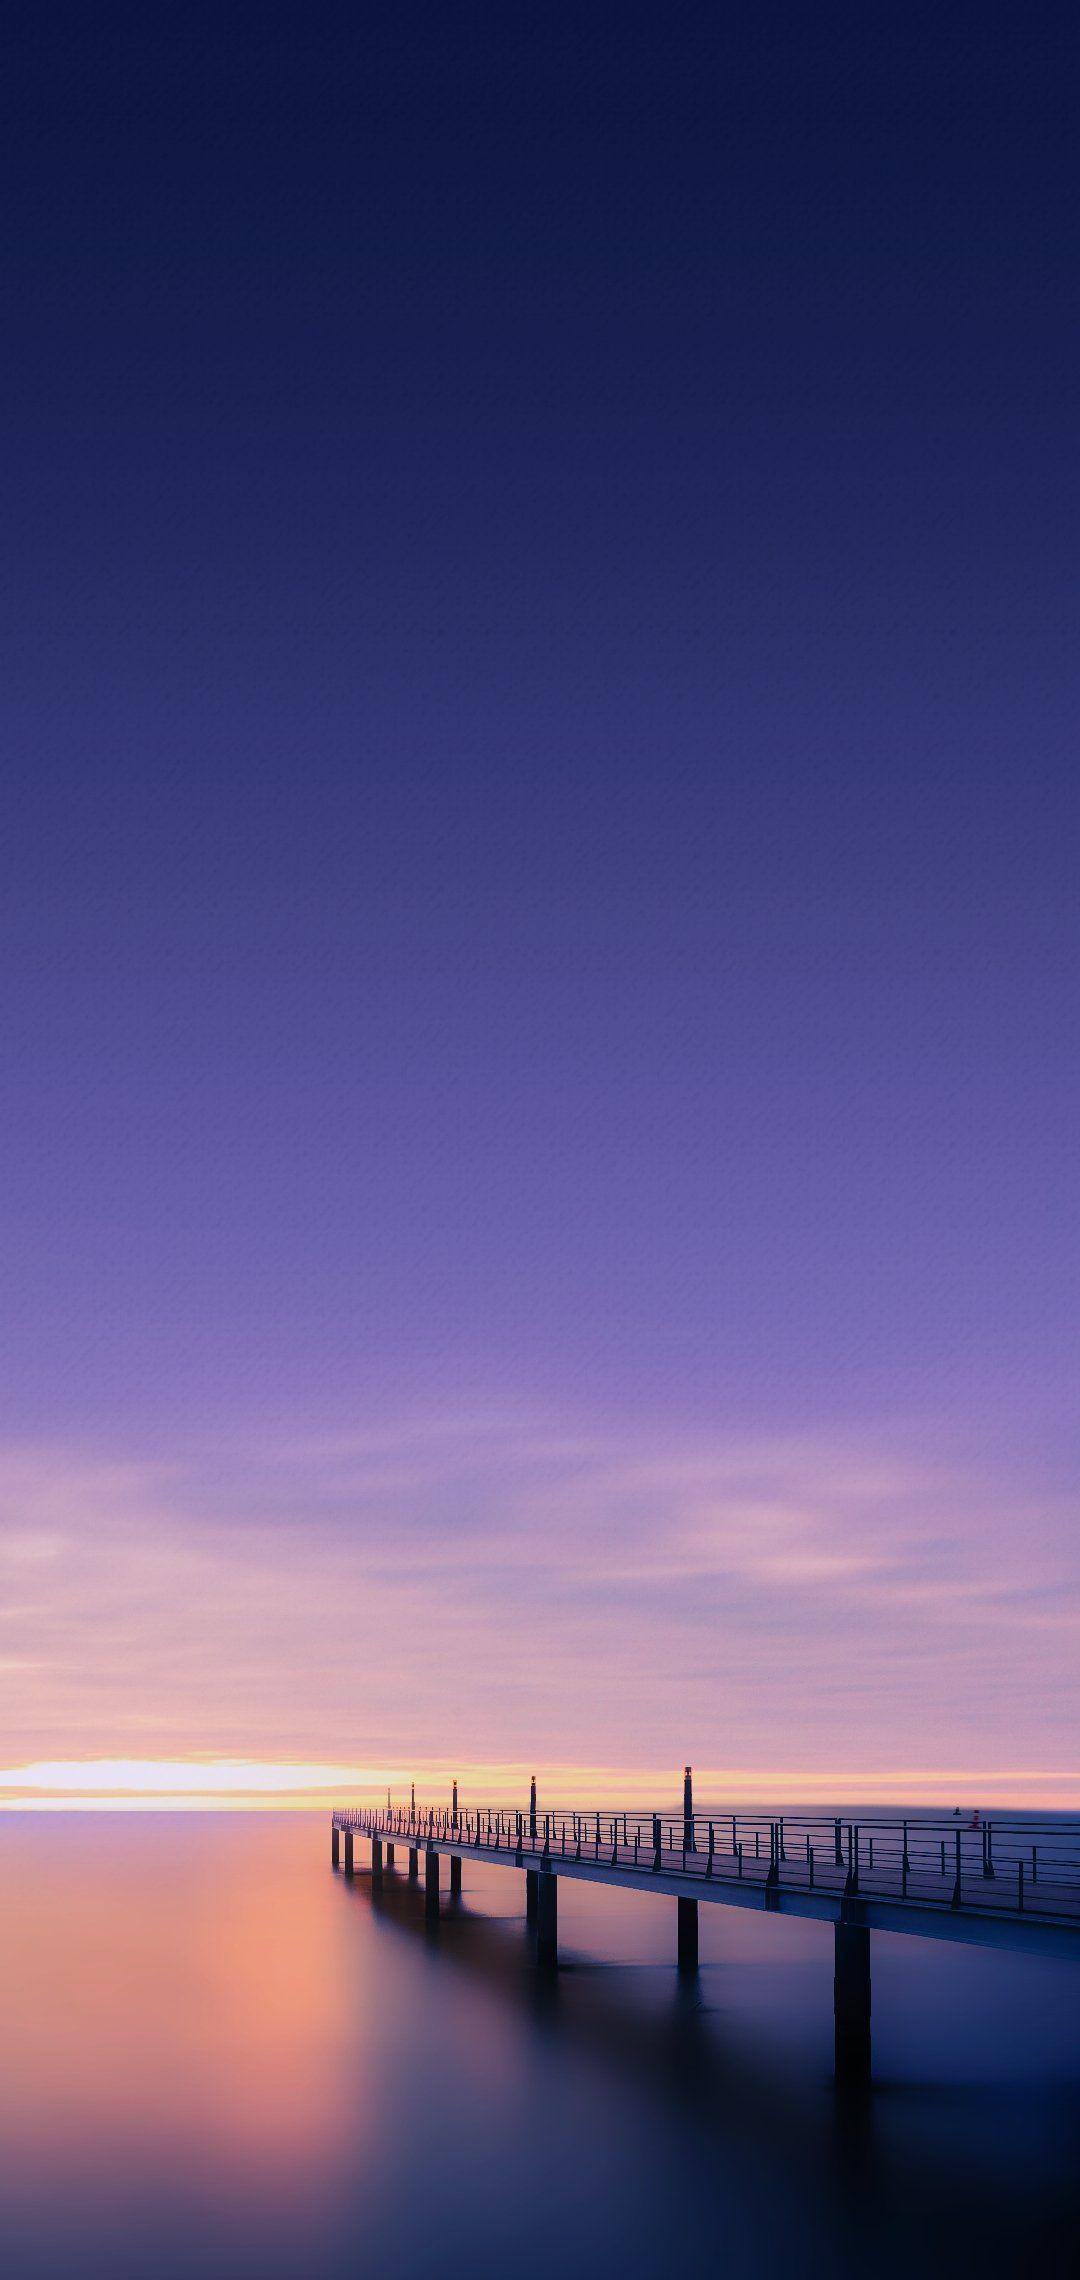 1080 x 2280 · jpeg - Android Nokia Wallpapers - Wallpaper Cave